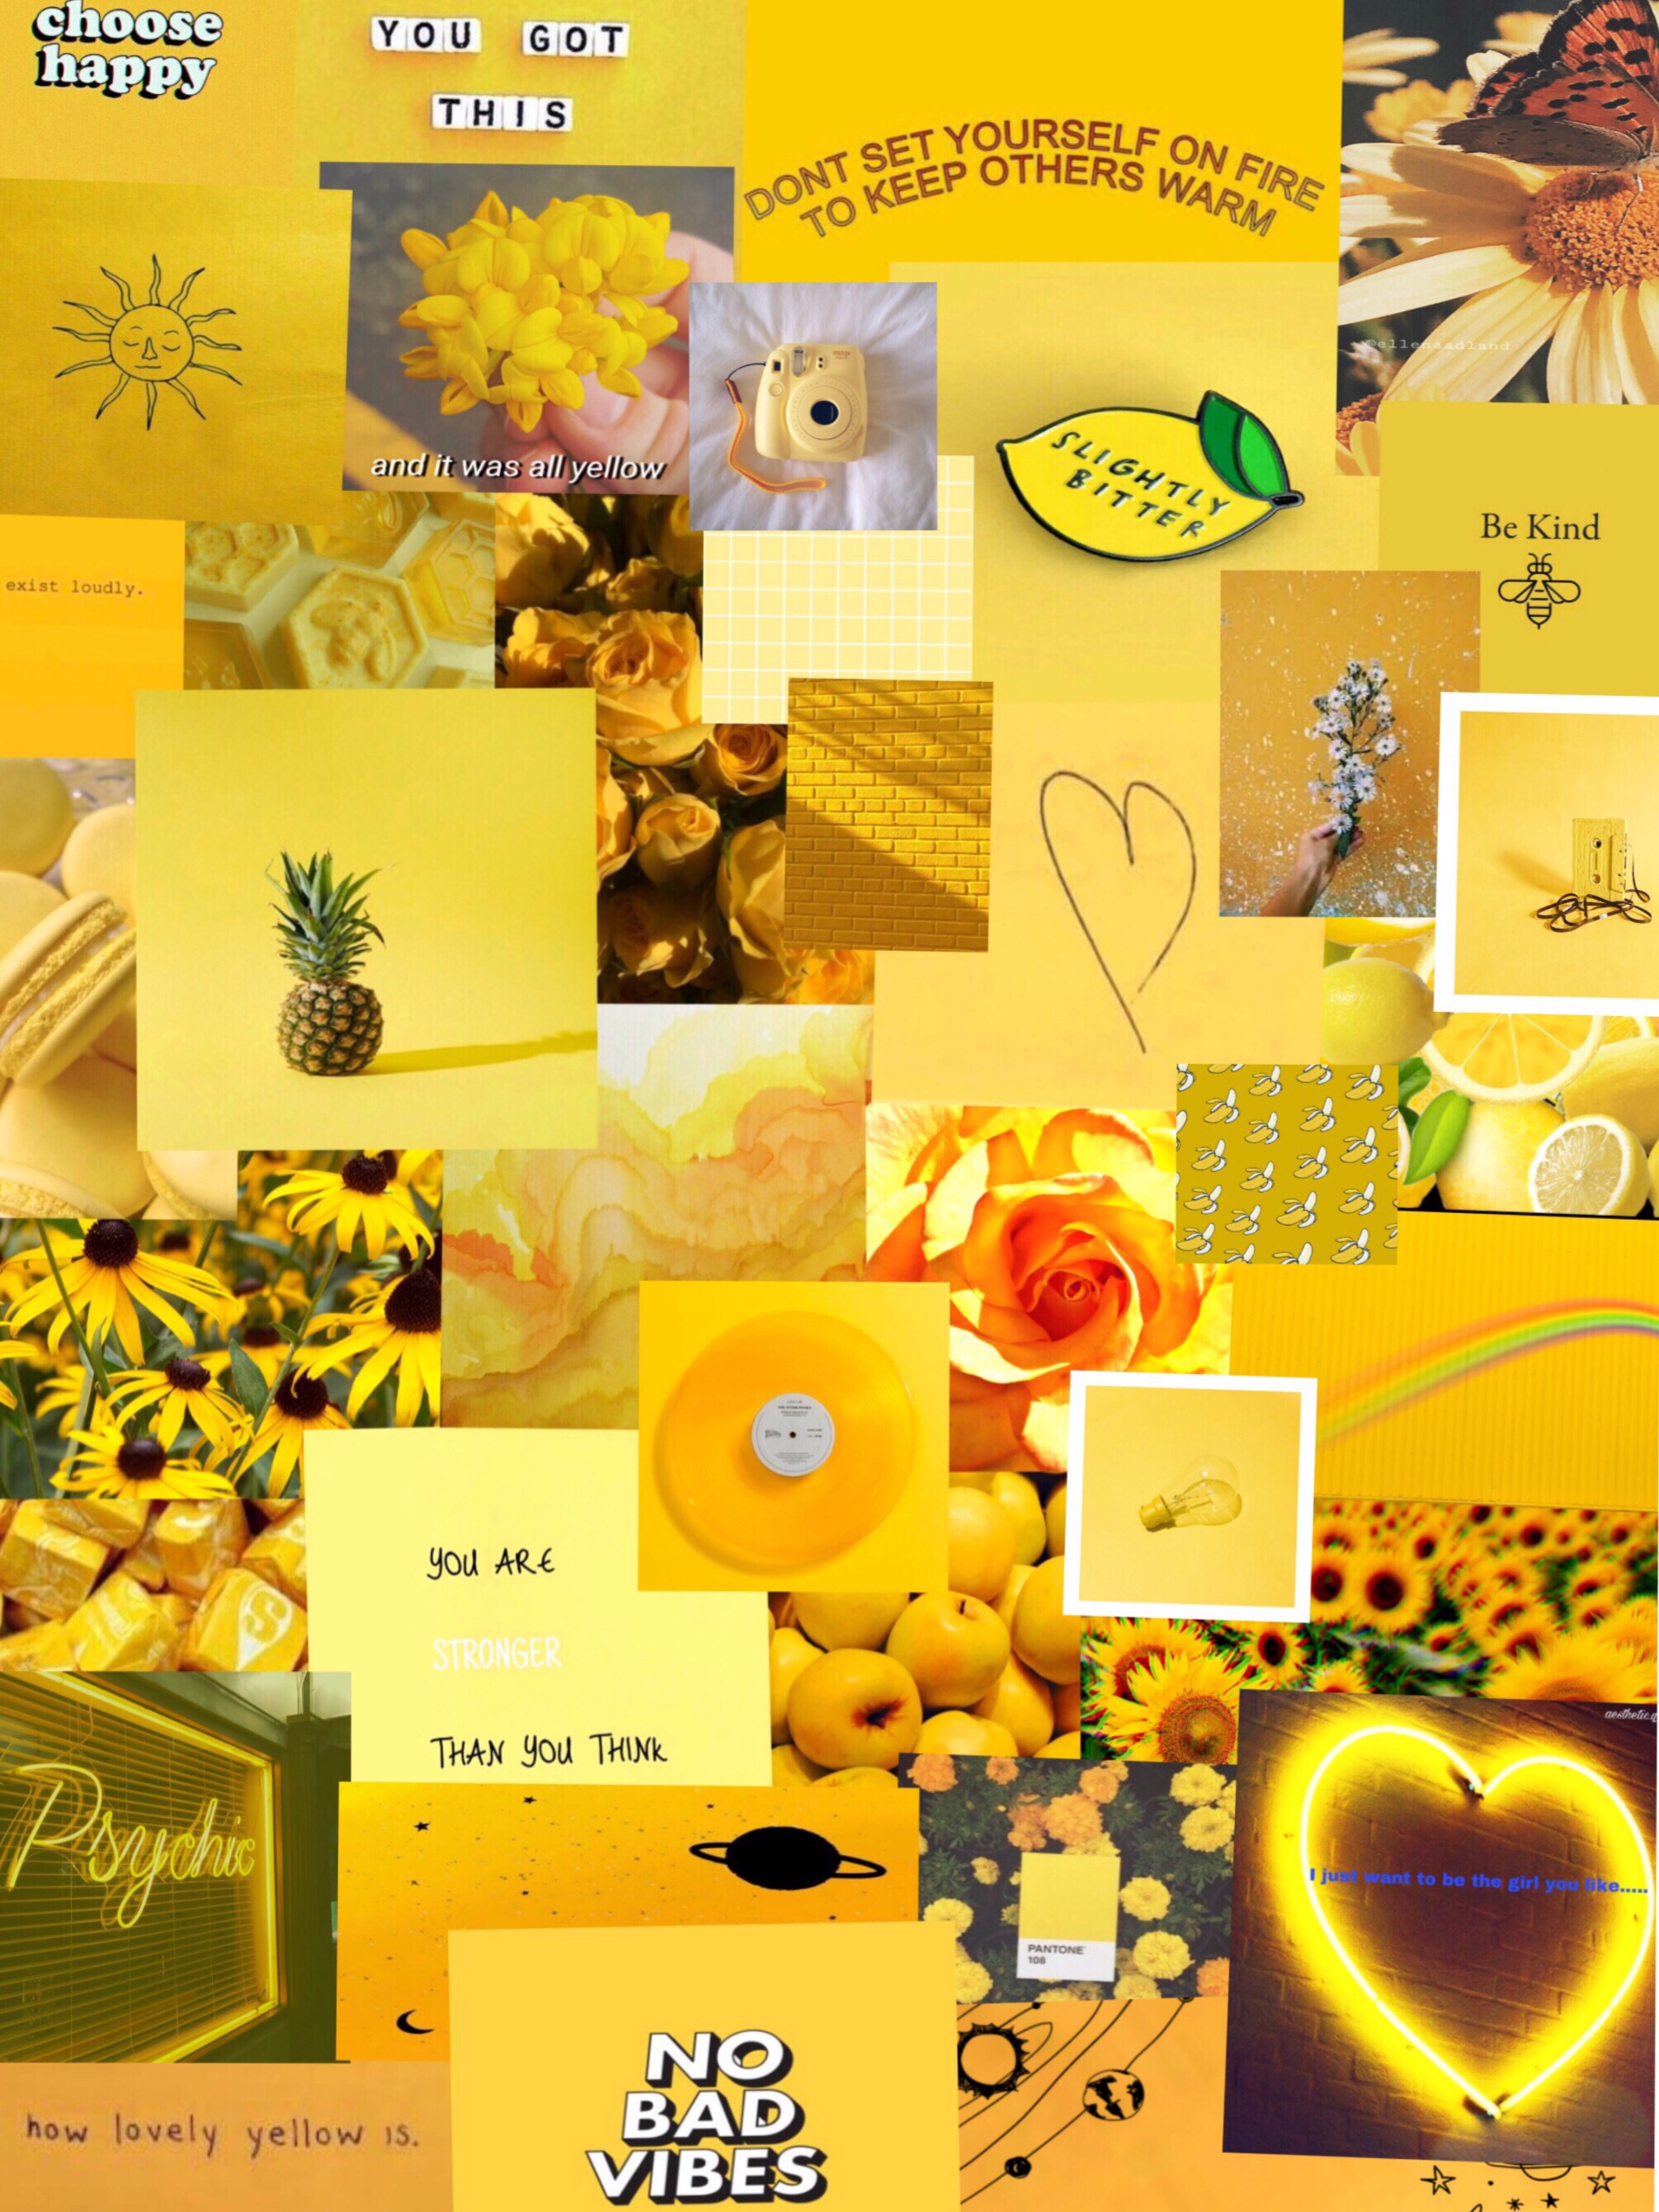 Yellow Aesthetic Wallpapers and HD Backgrounds free download on PicGaGa.